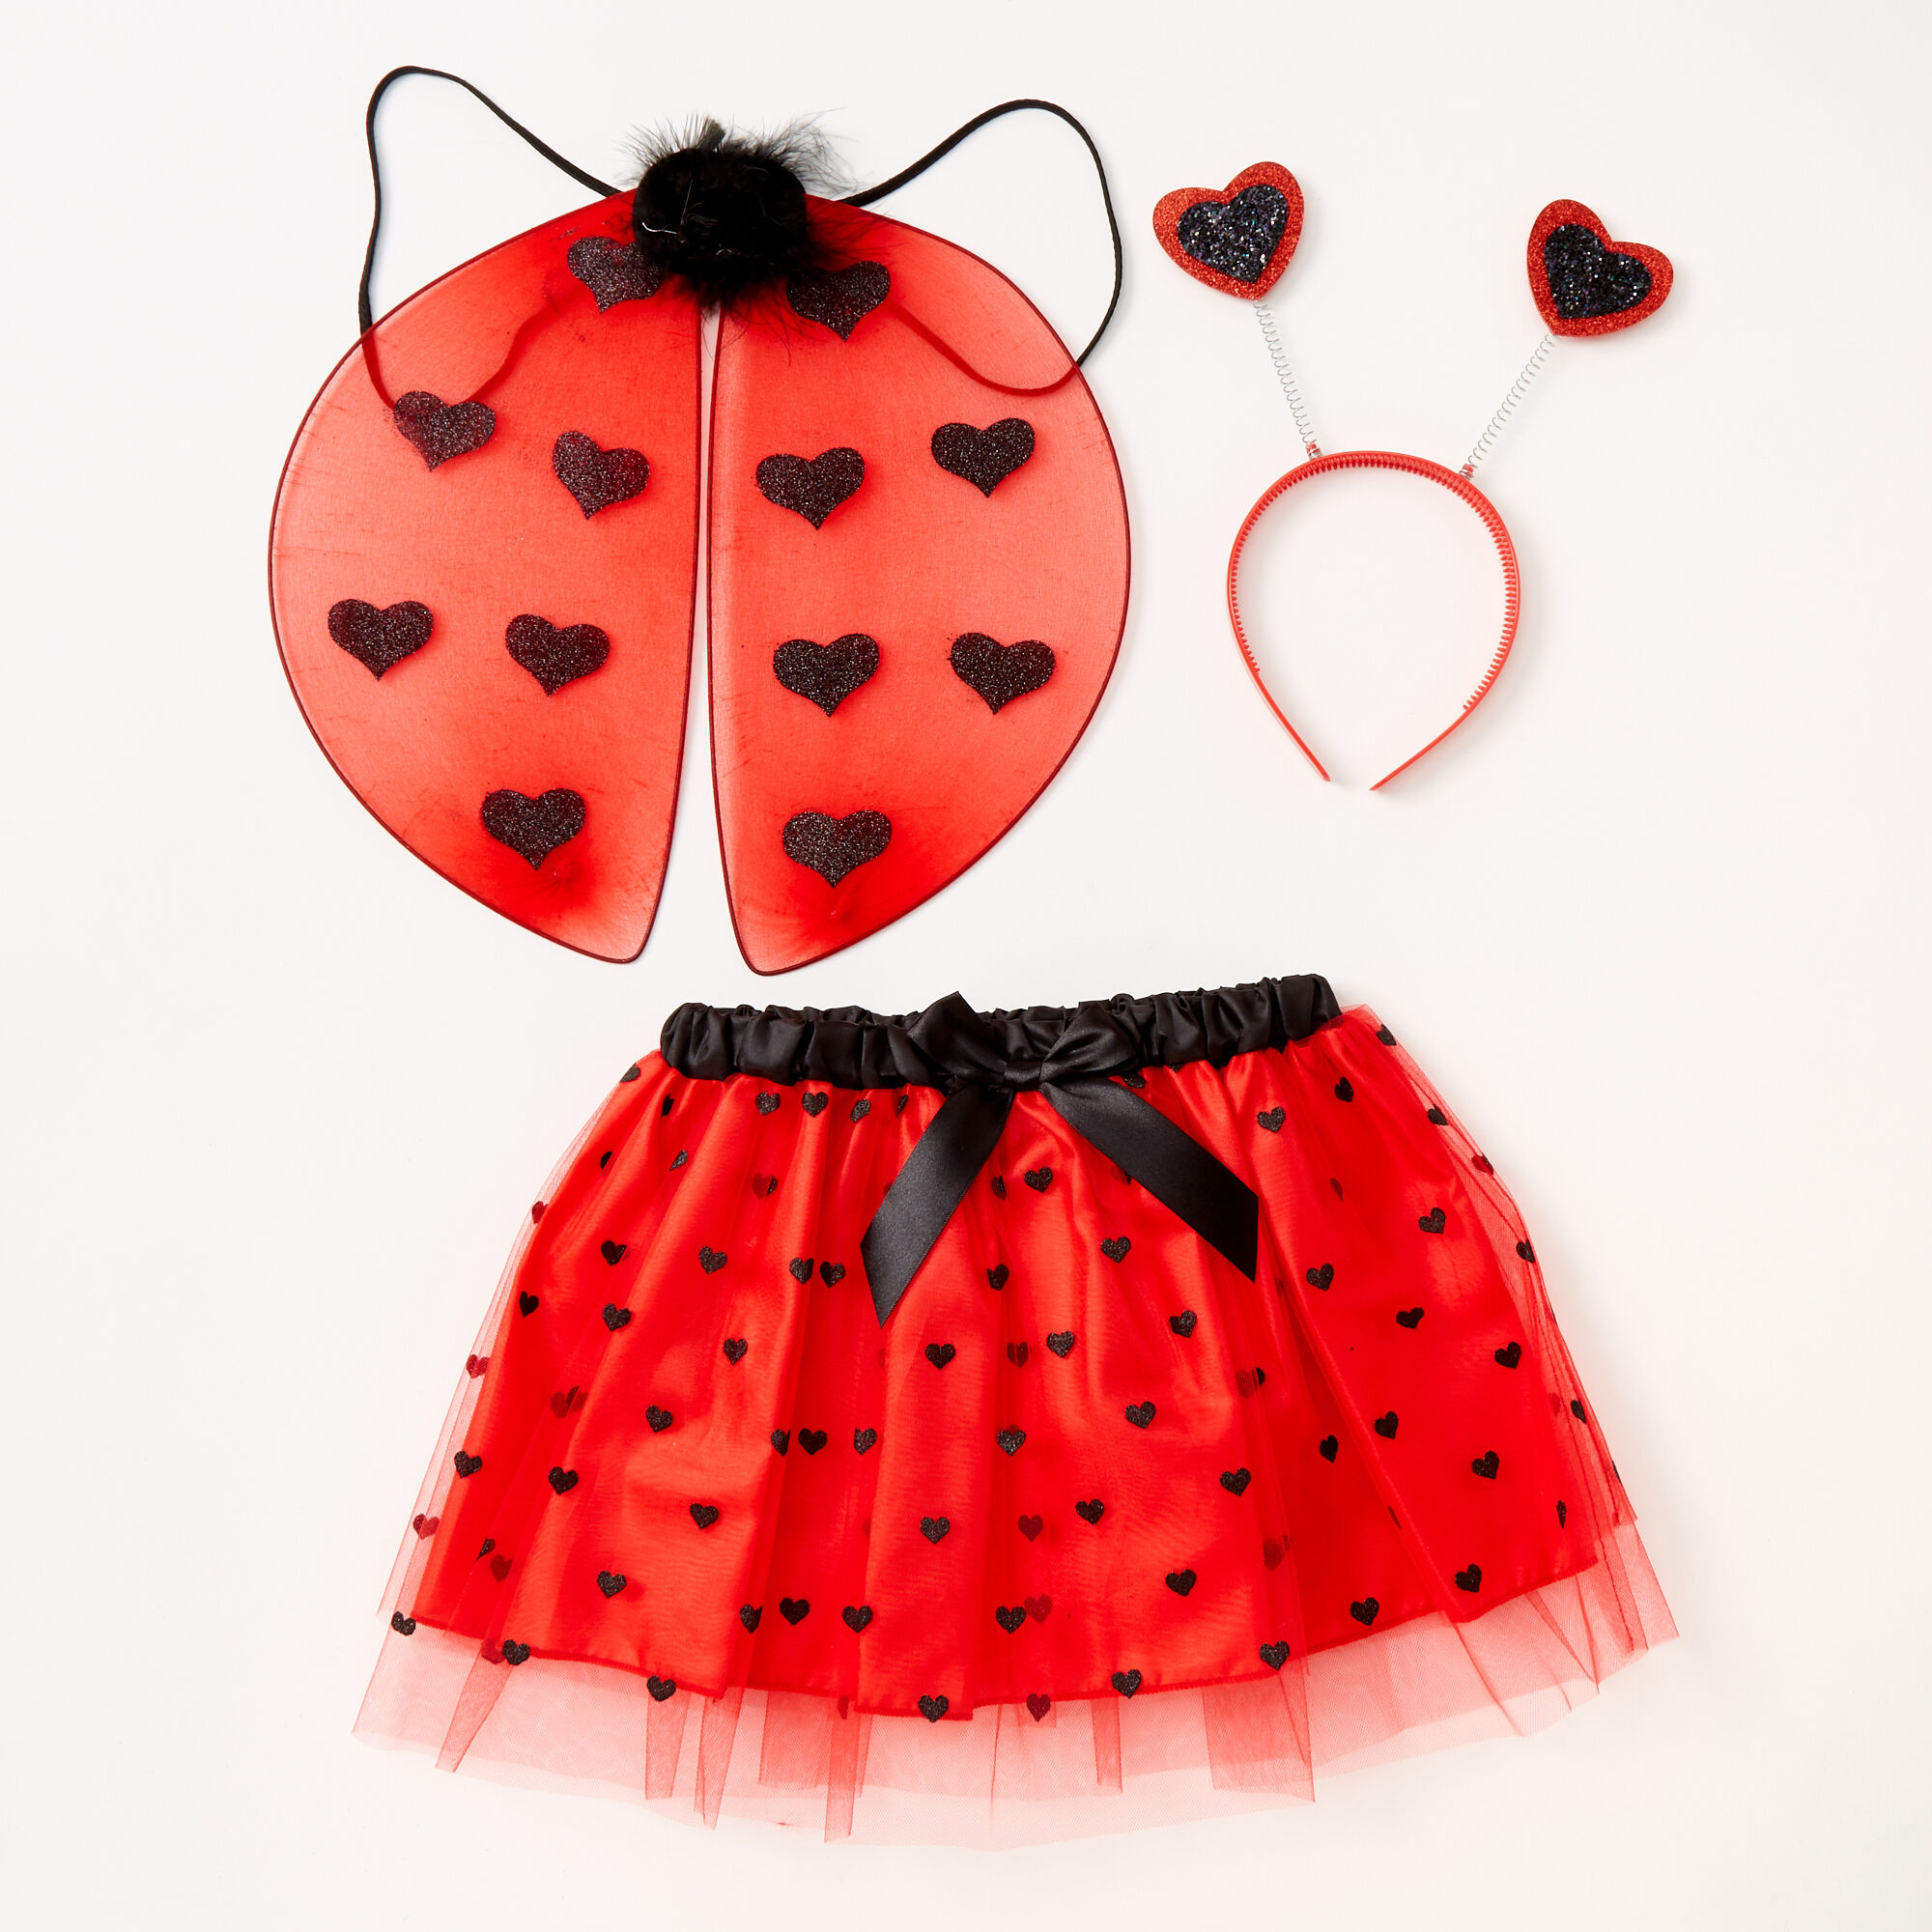 View Claires Club Ladybug Dress Up Set 3 Pack Red information